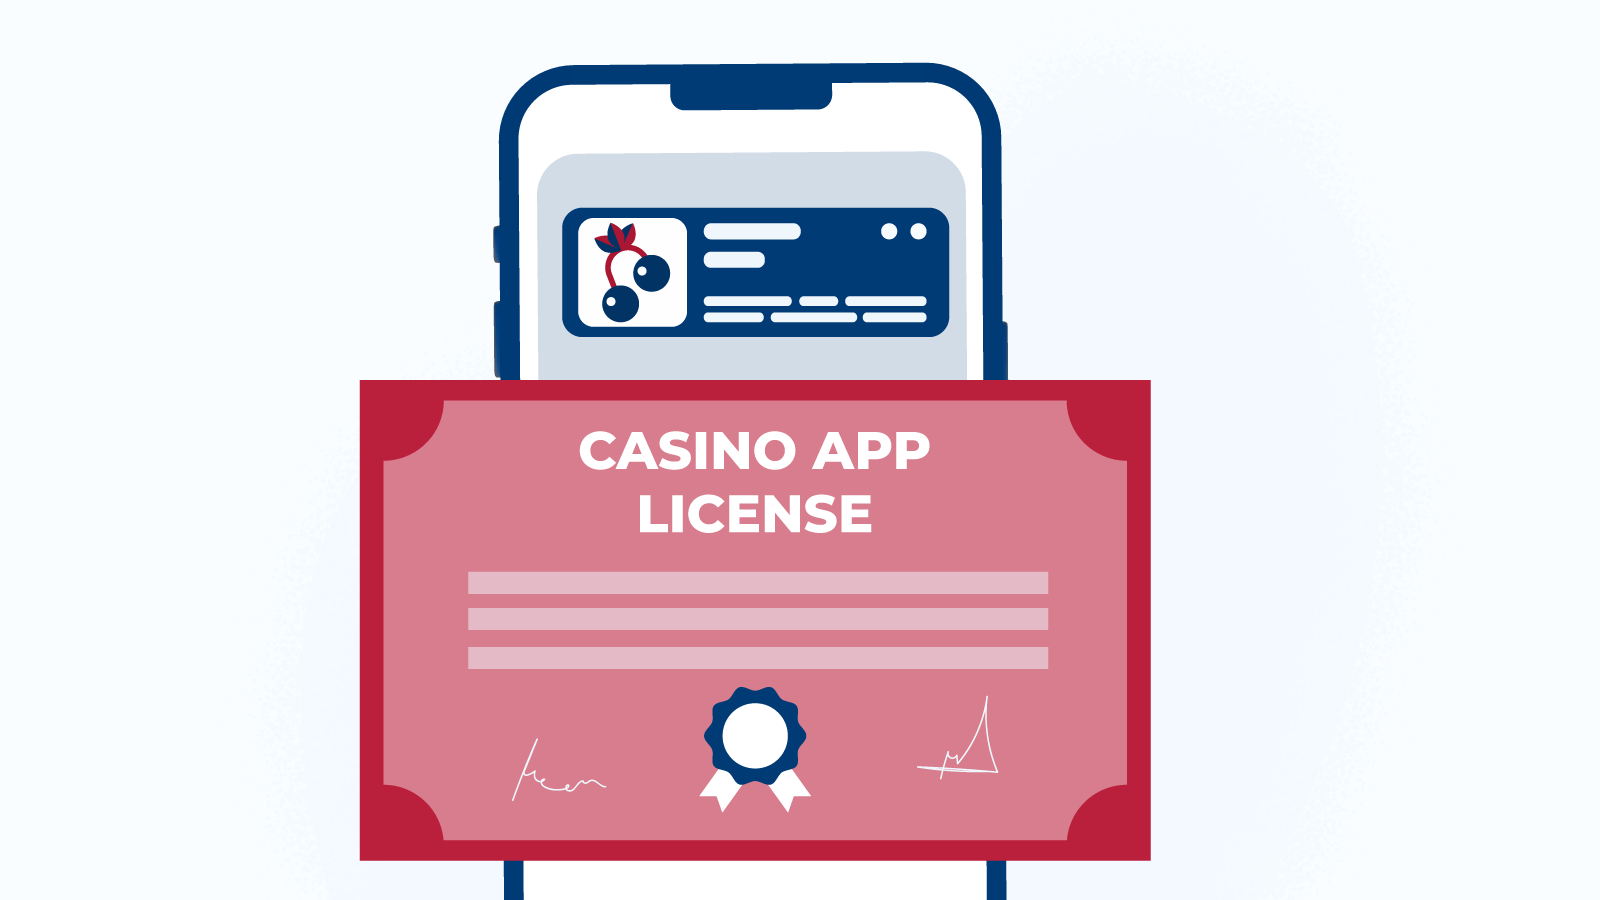 The importance of licensing for a casino mobile app